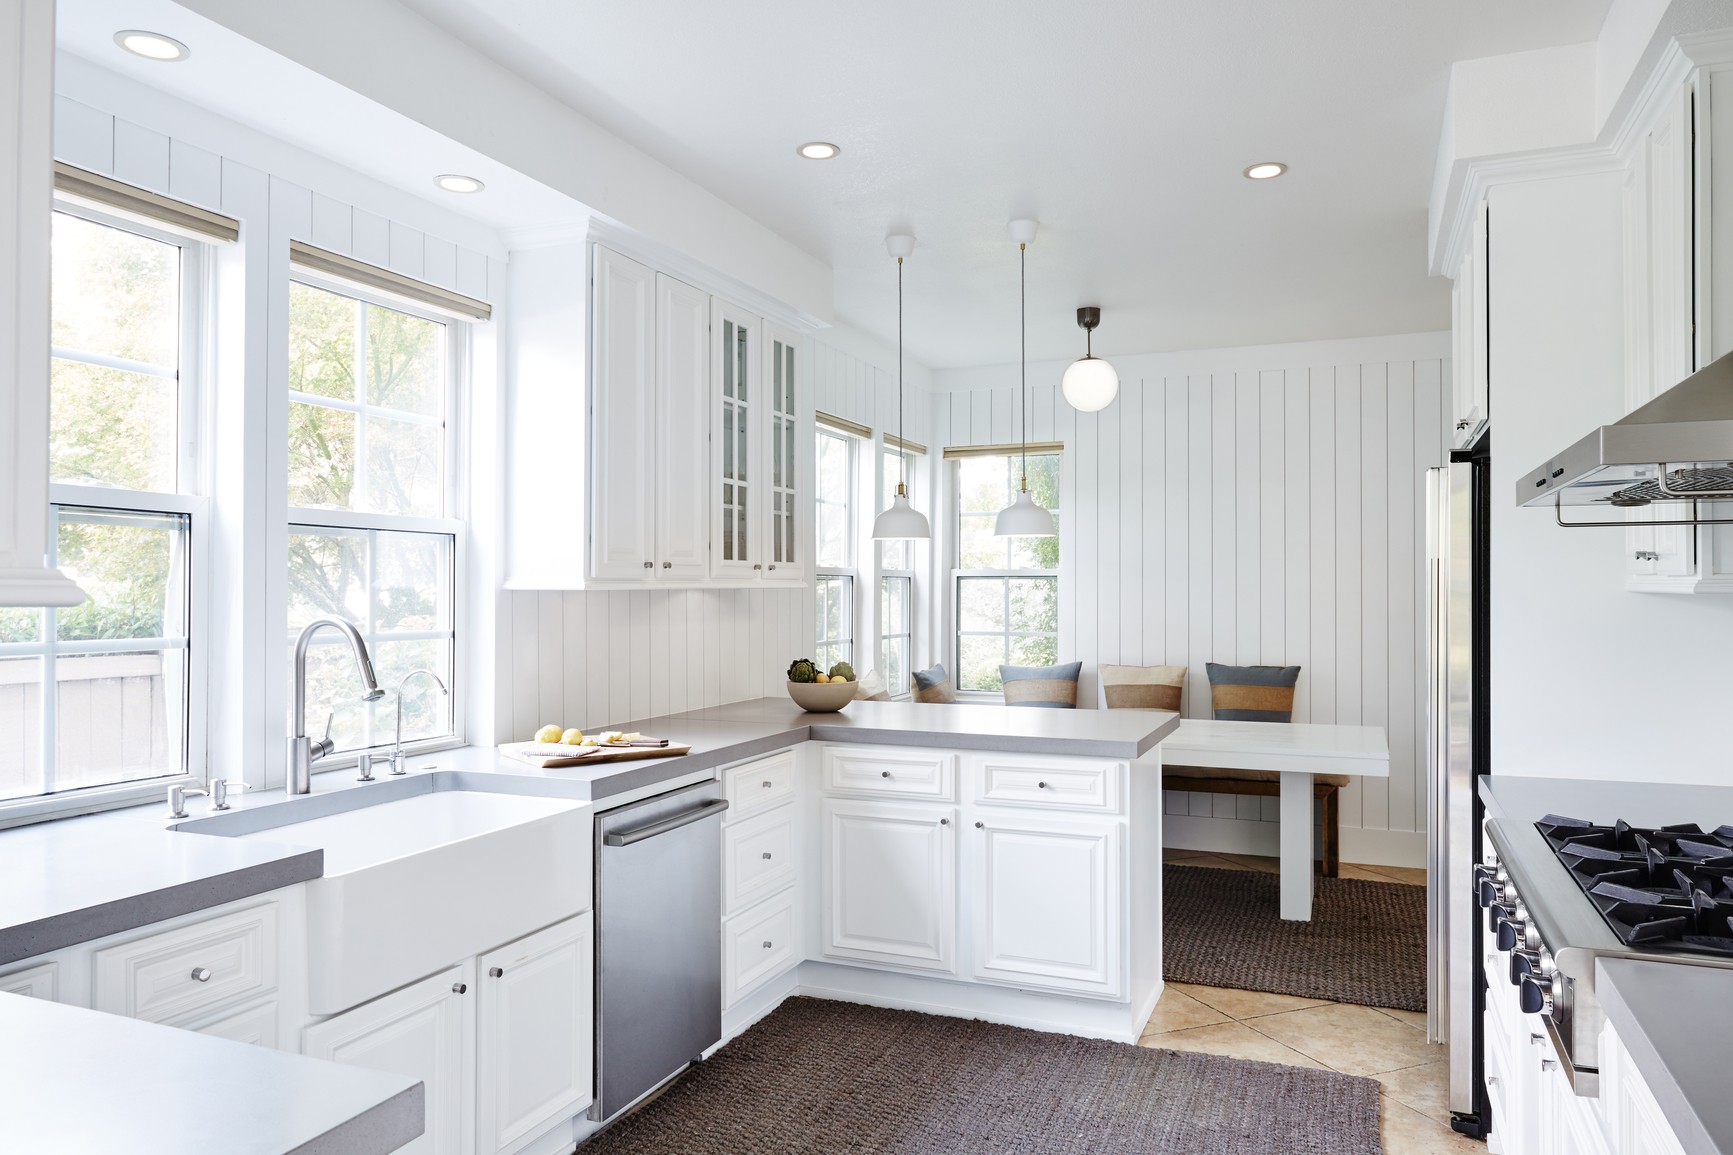 Simplify Your Search: The Best Way to Choose a Kitchen Remodeling Contractor